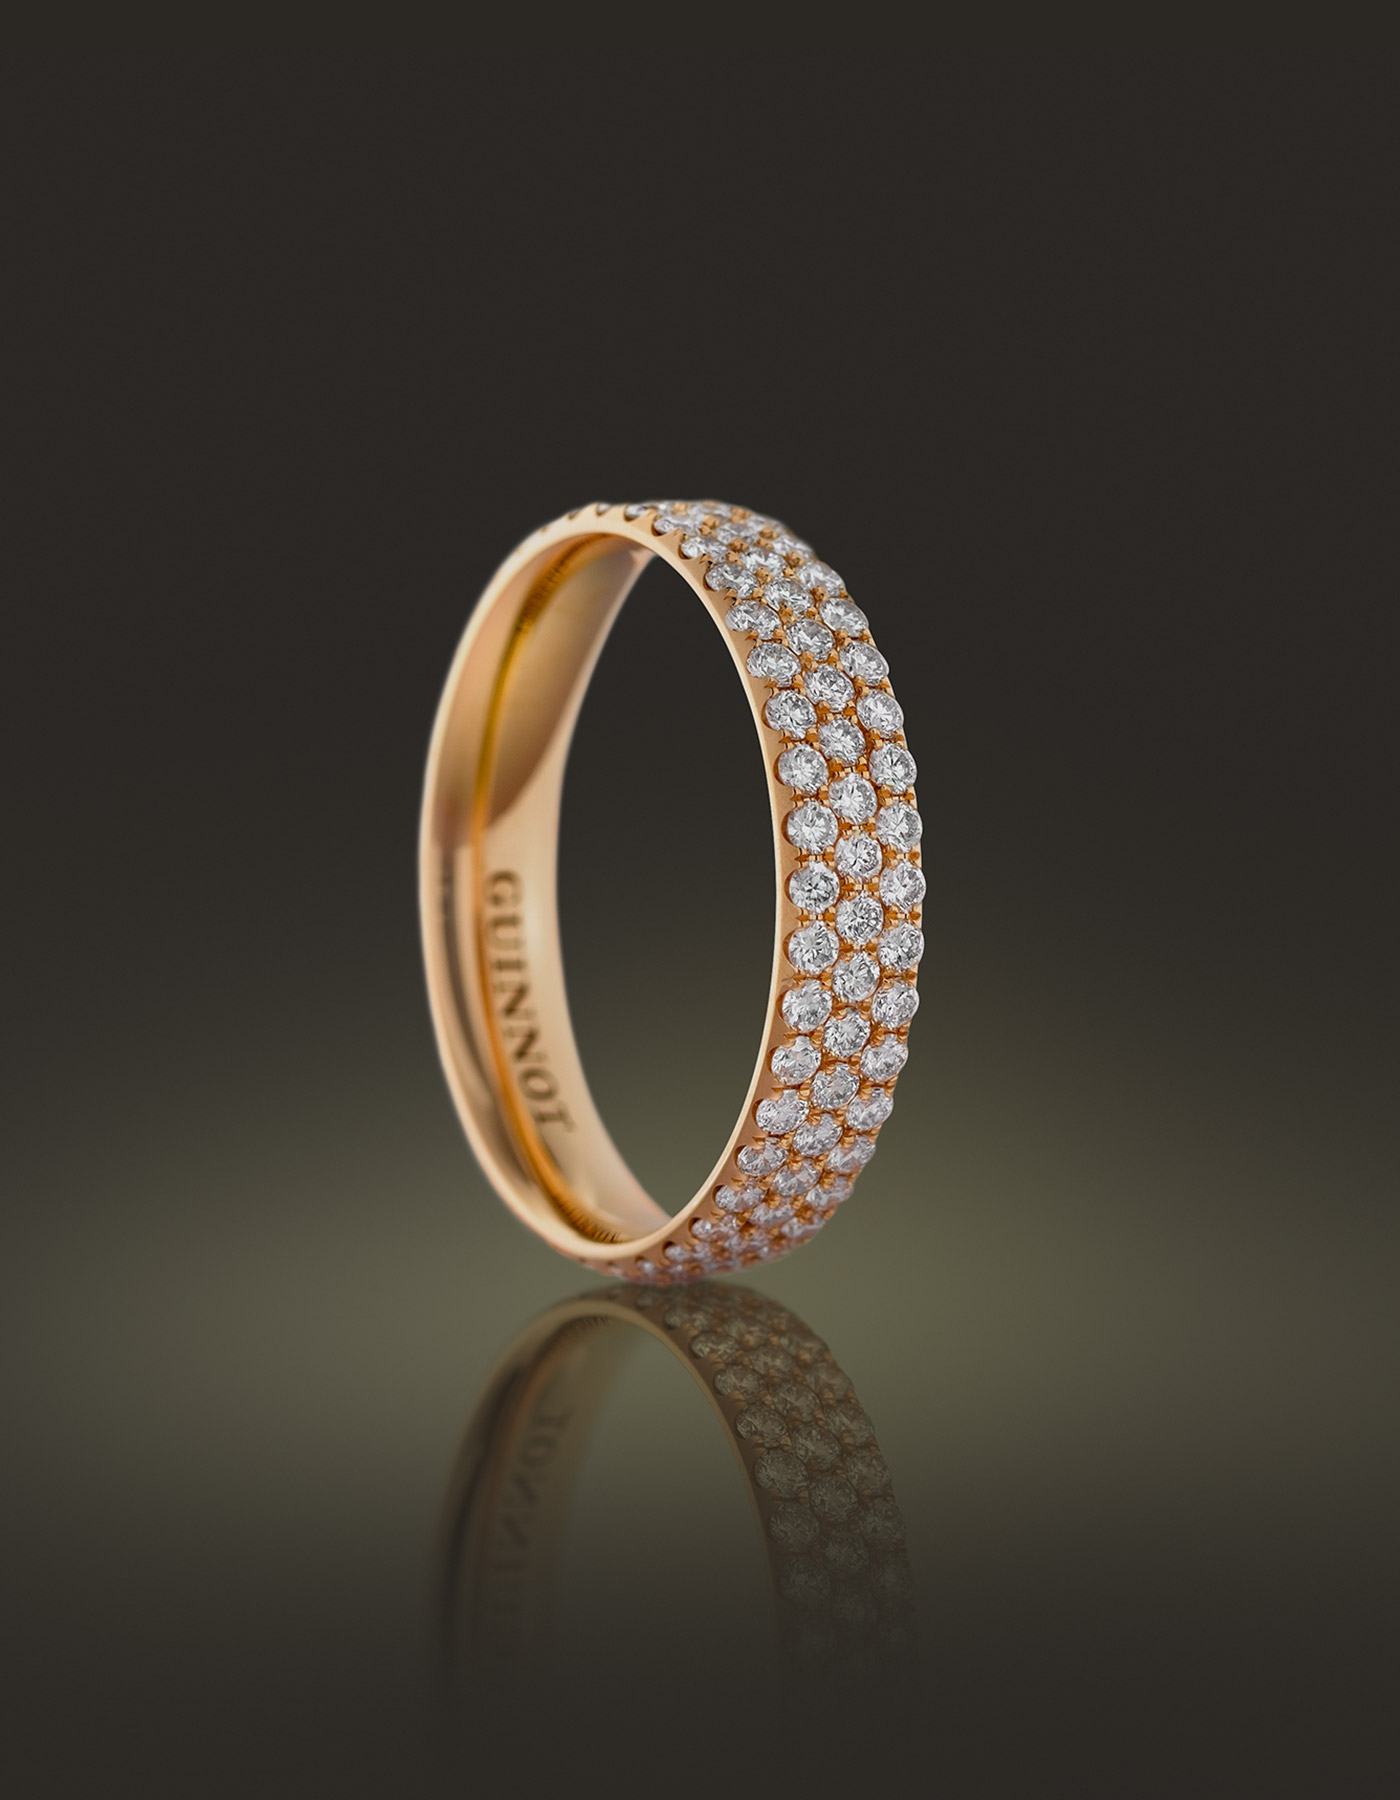 Guinnot Anonymous Three-row micropavé diamond eternity ring in 18k rose gold